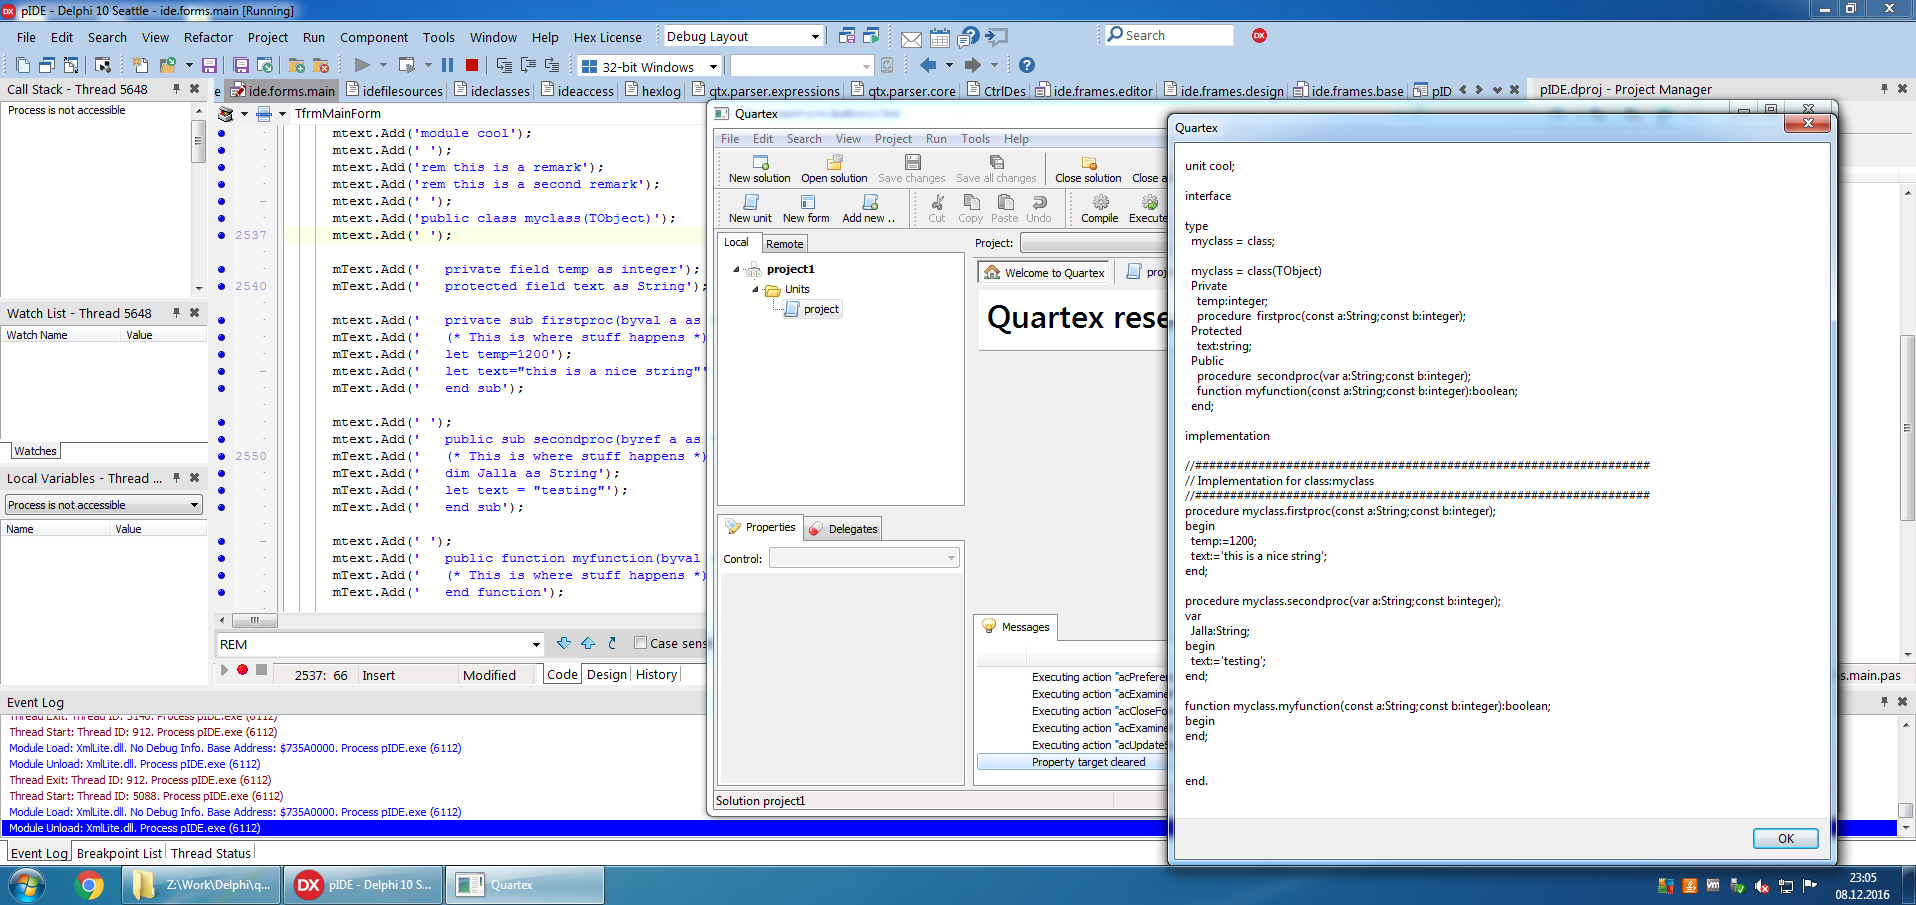 Visual Basic to Smart Pascal, awww.... just want to snuggle it :)